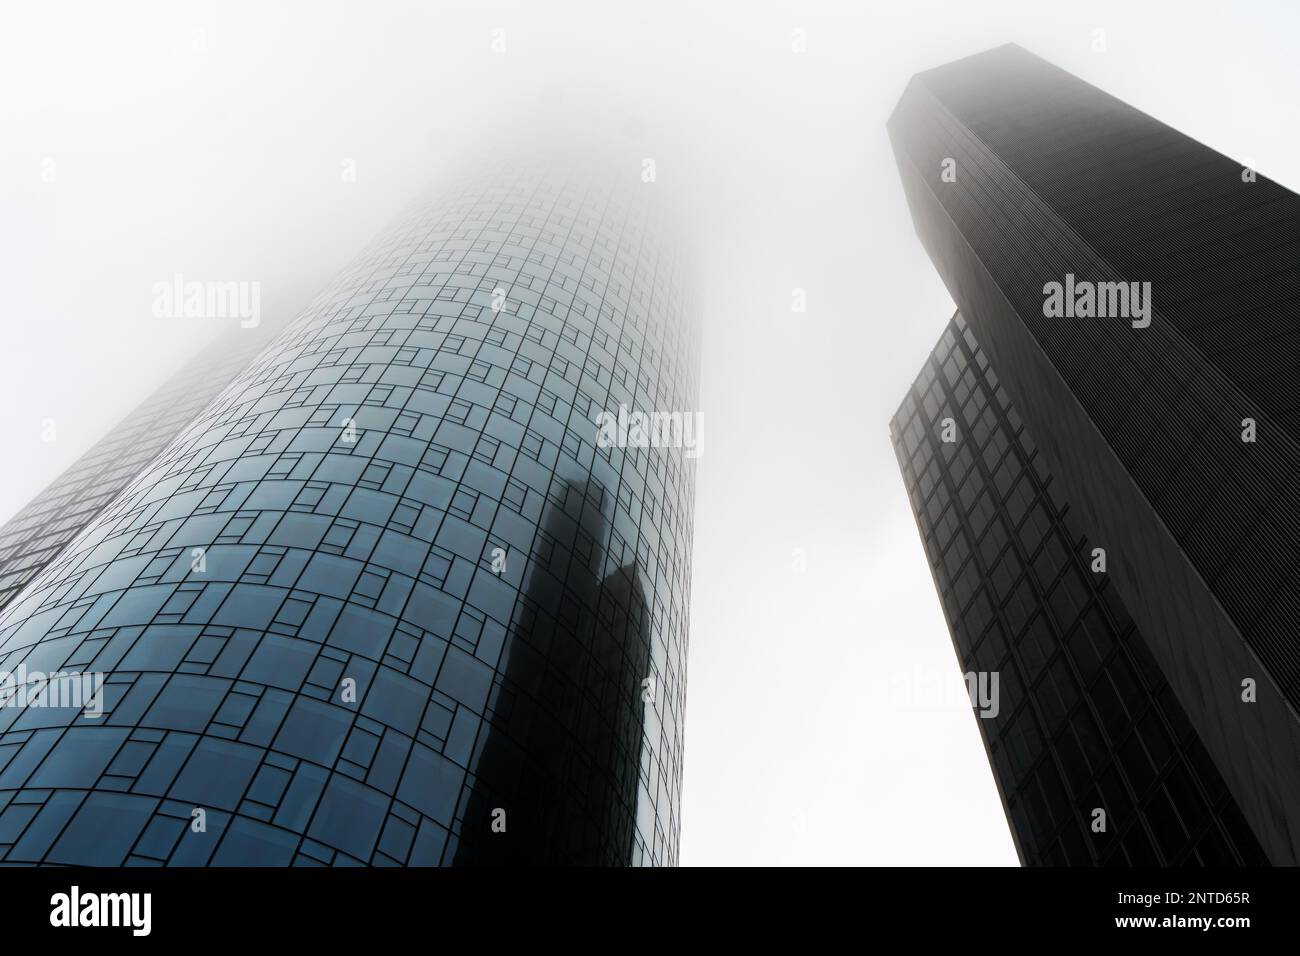 low angle view of two skyscrapers shrouded in fog or mist in the banking district of Frankfurt on Main, Germany Stock Photo